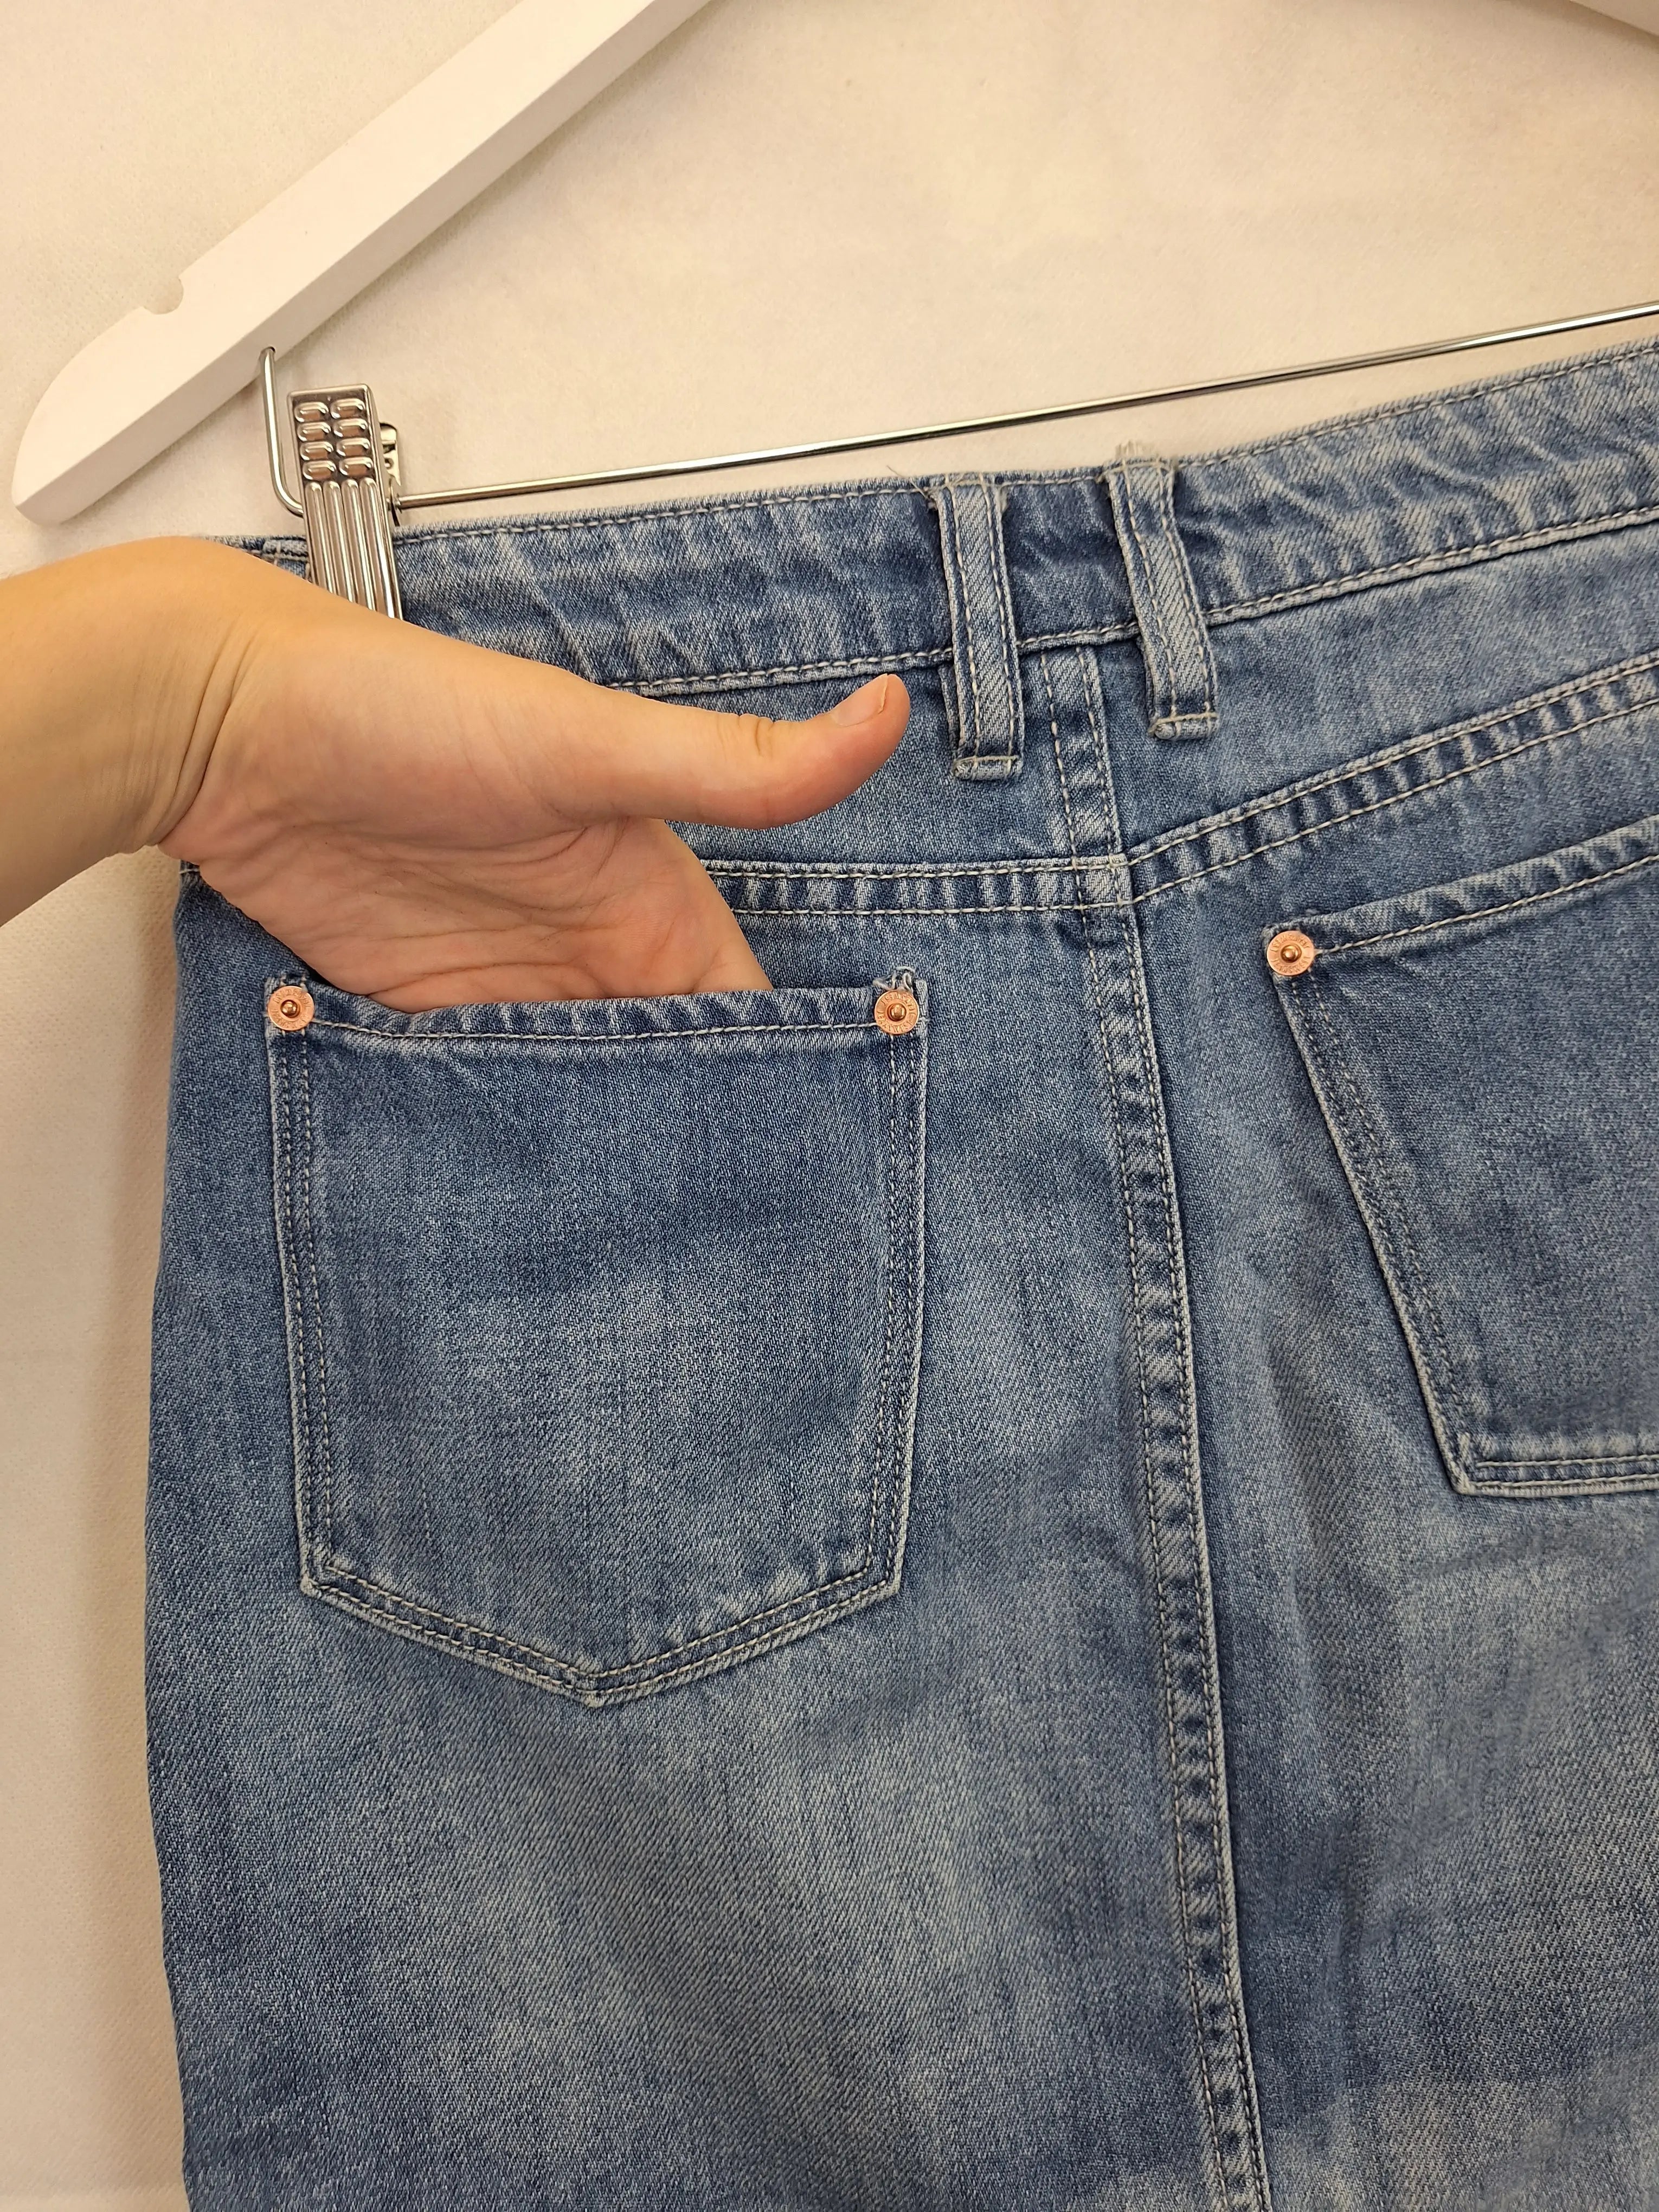 Jeans West Straight Mid blue Denim Mini Skirt Size 10 by SwapUp Online Second Hand Store Thrift Store Op Shop 20555862